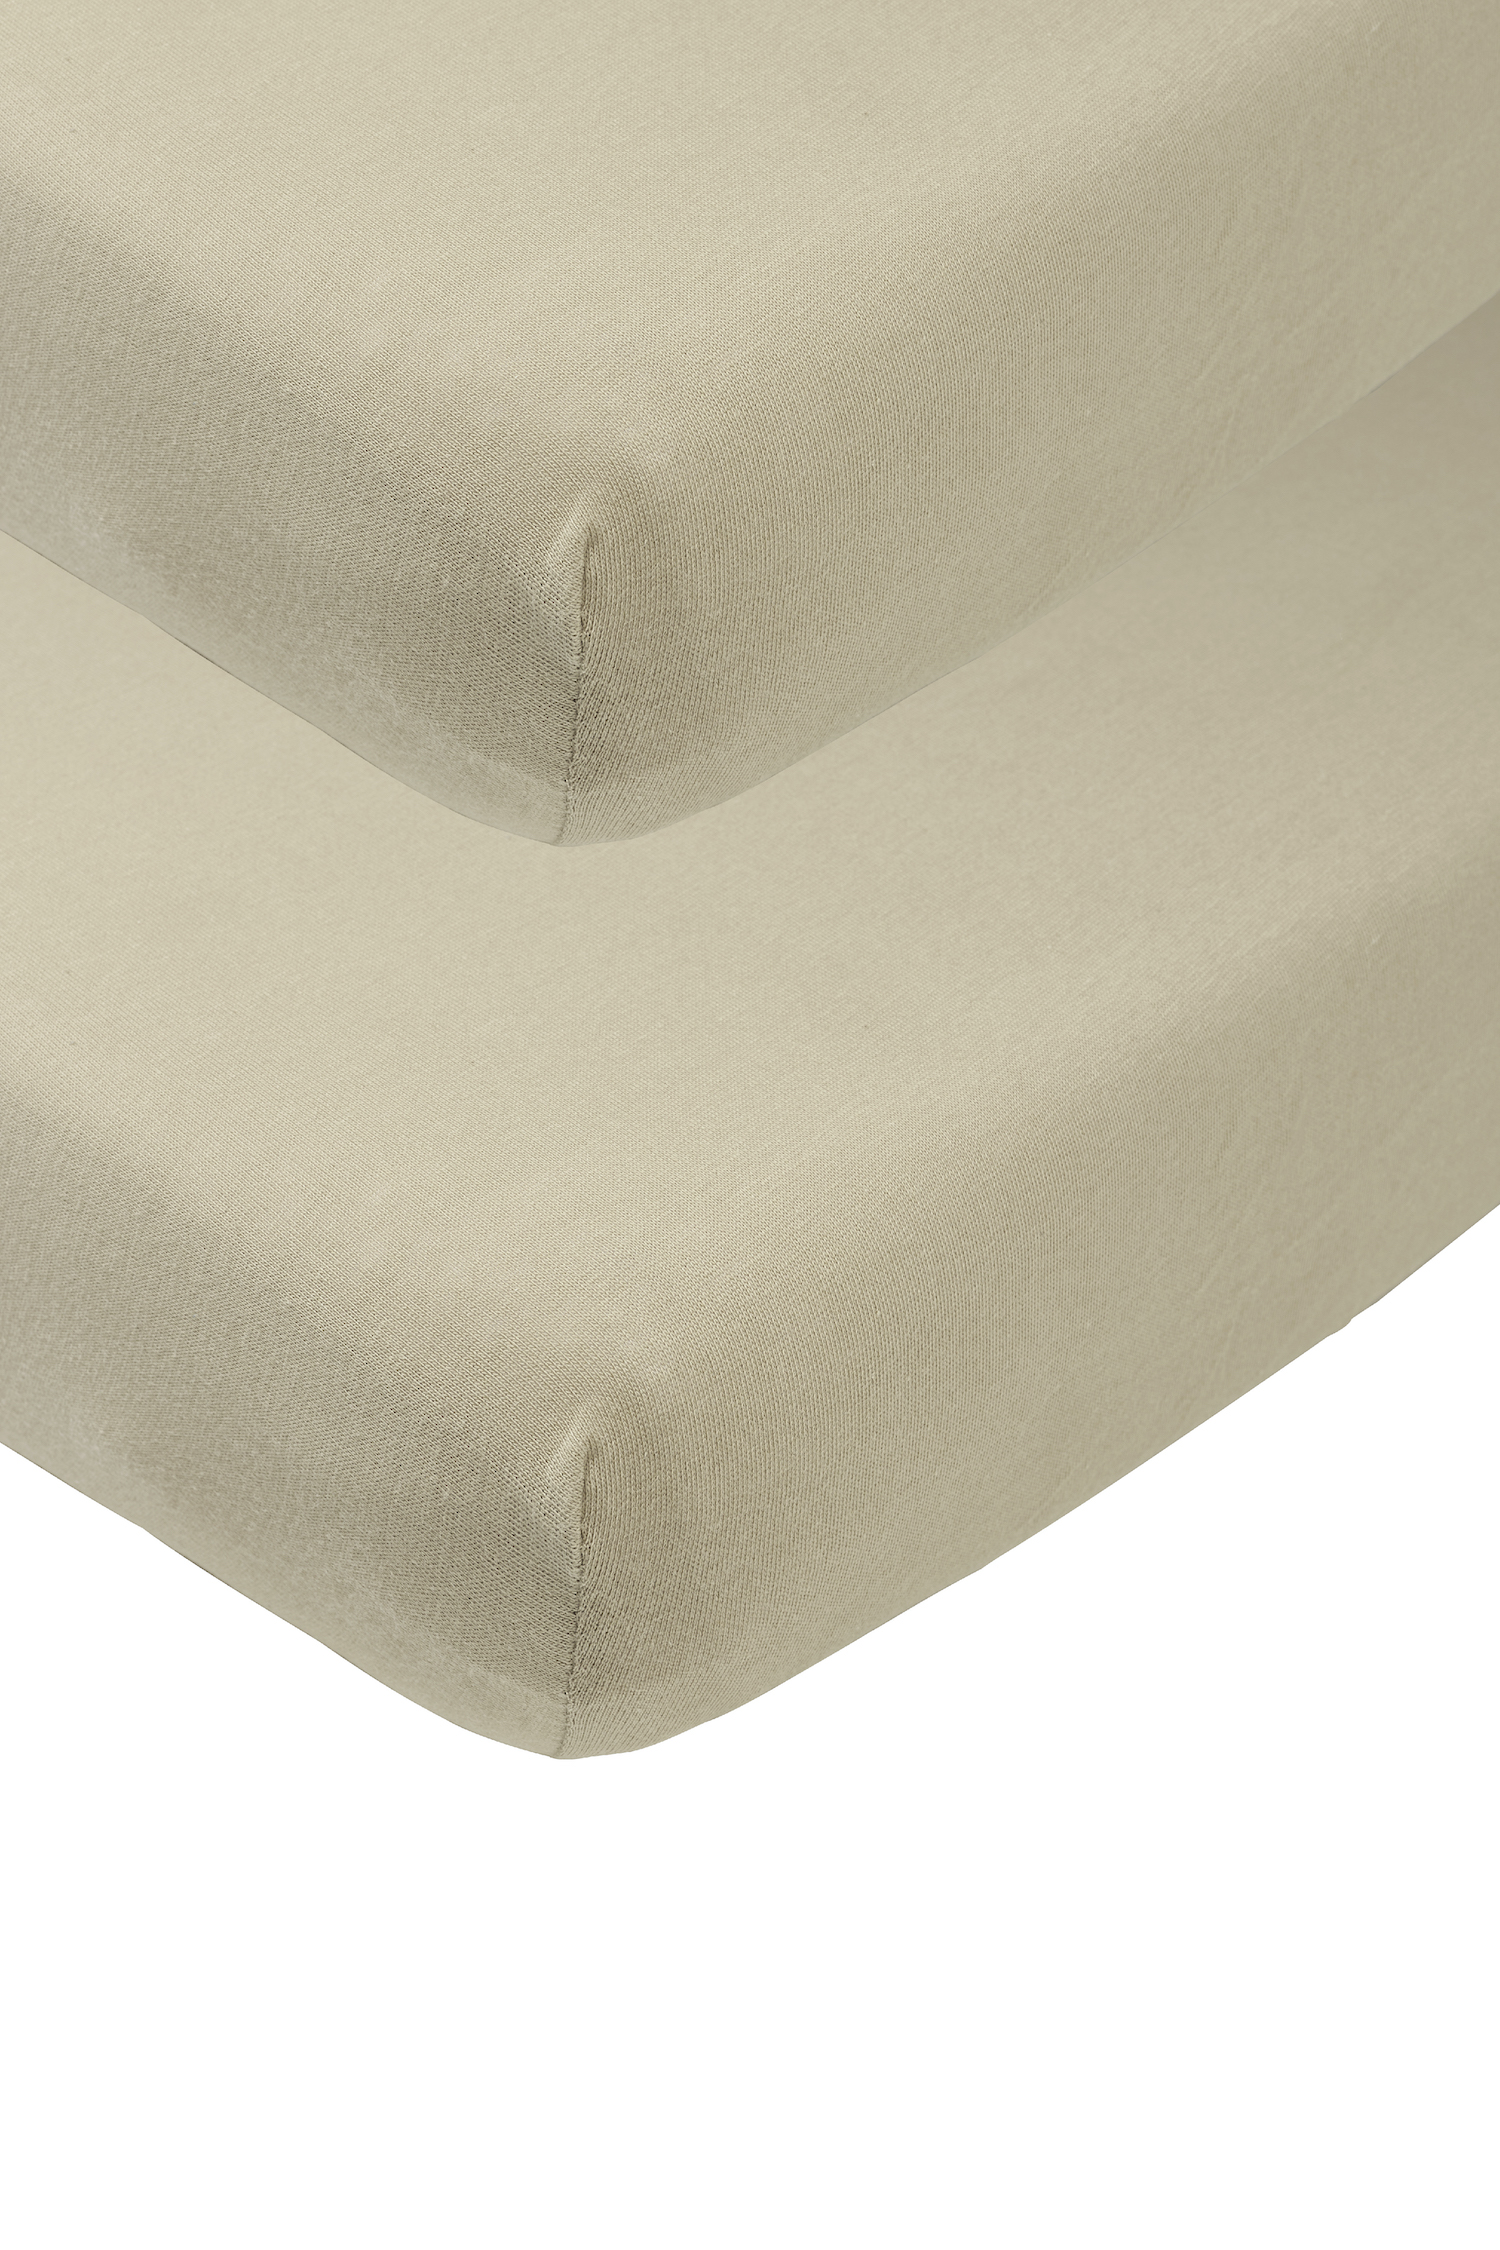 Jersey Hoeslaken Juniorbed 2-pack - Taupe - 70x140/150cm